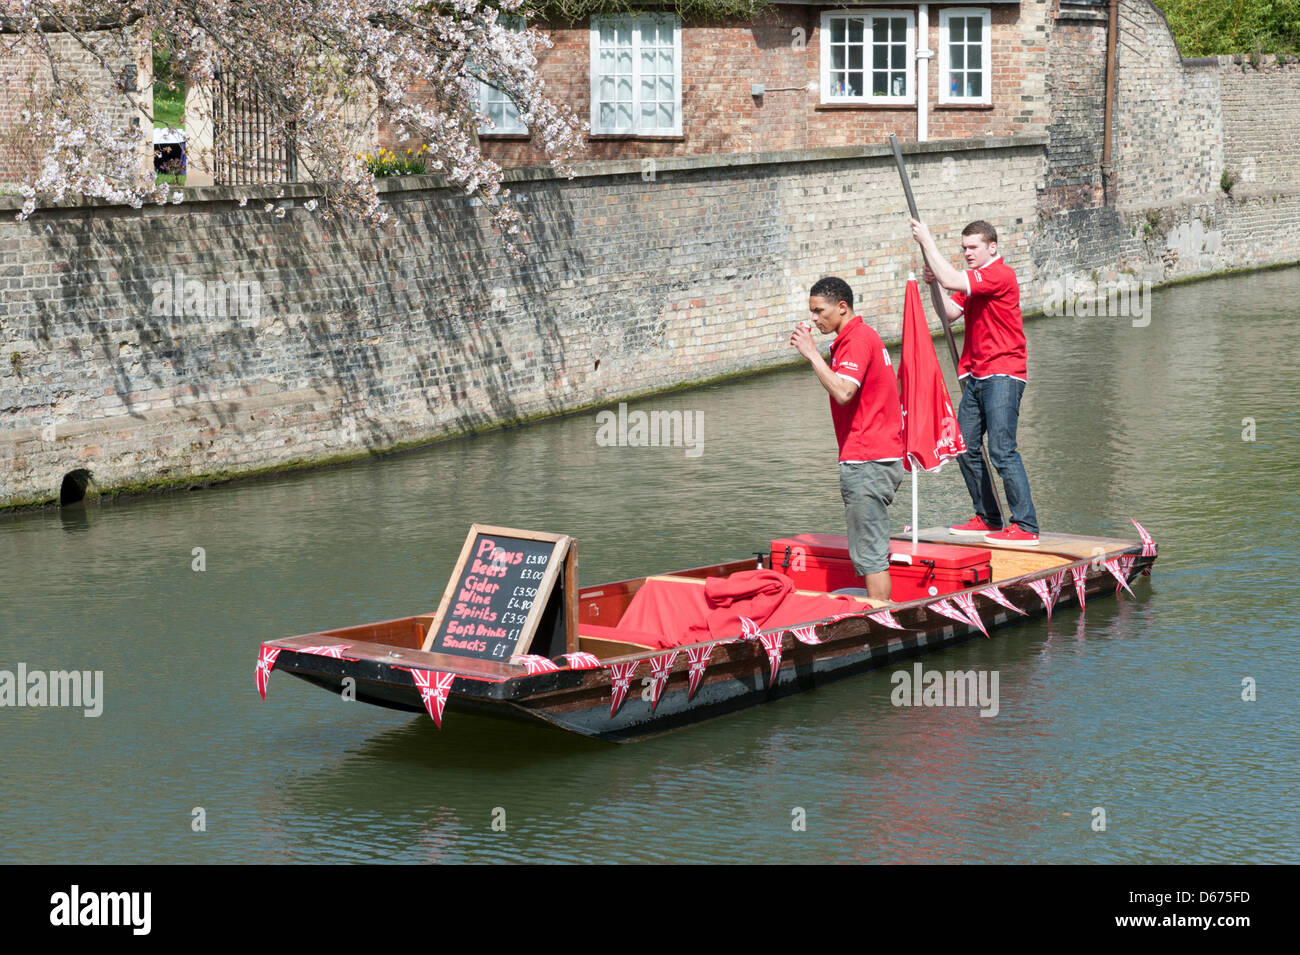 Cambridge, UK. 14 April 2013. A colourfully decorated punt sells drinks and snacks on the River Cam. The river was busy with tourists enjoying the warmest day of the year so far with temperatures hitting 20 degrees centigrade. Spring weather finally arrived after weeks of cold wet weather. Stock Photo